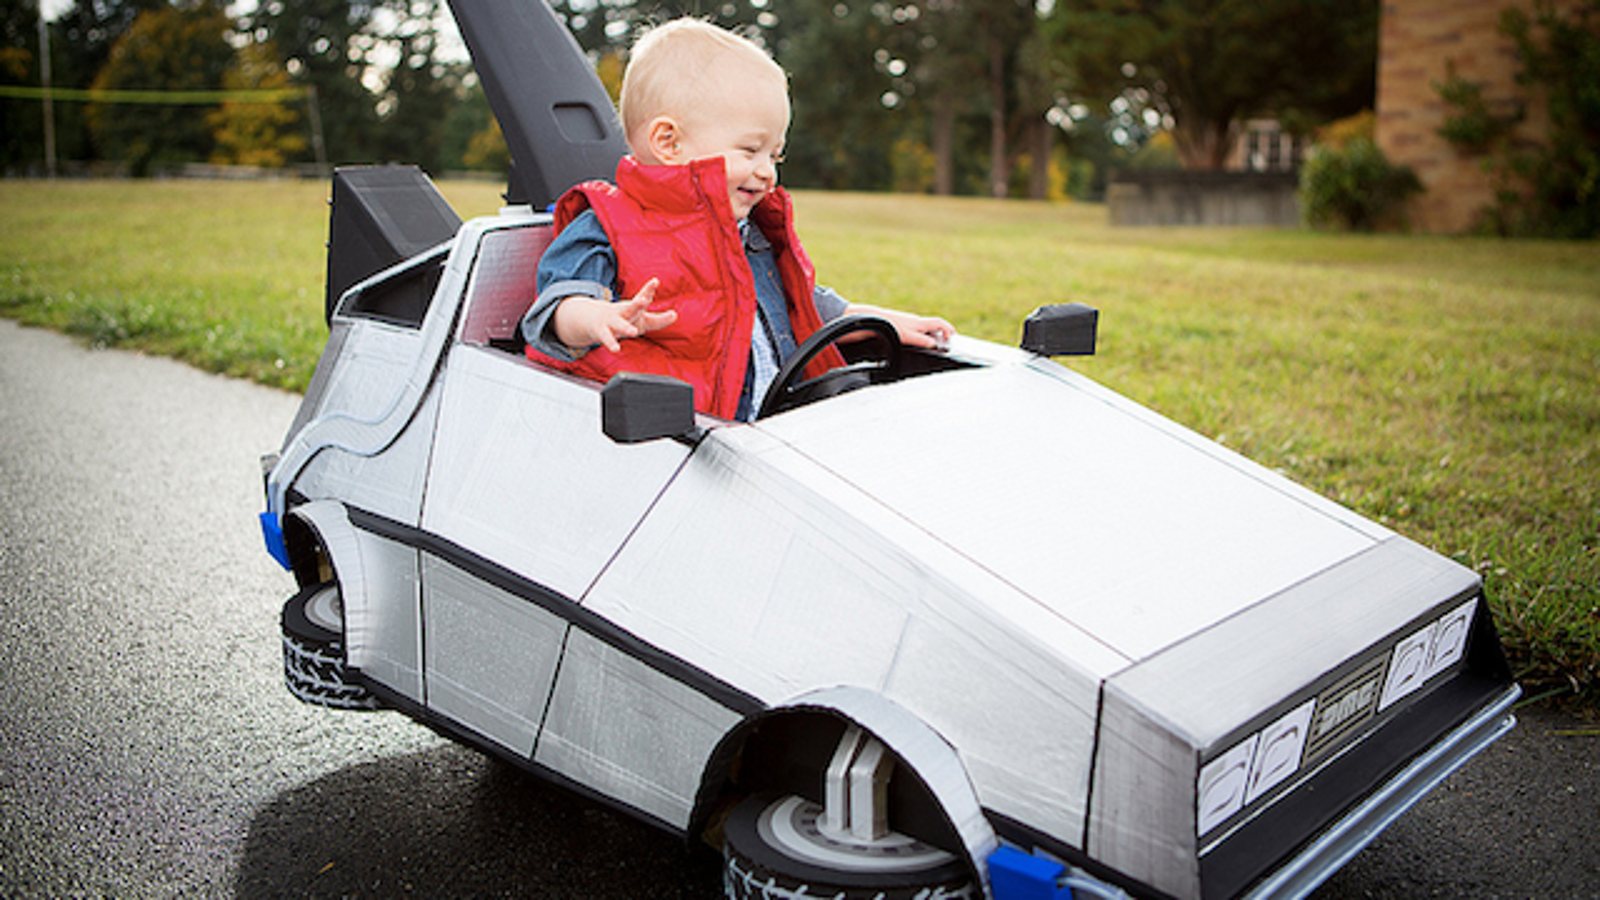 This Awesome Baby's Marty McFly Costume and DeLorean Push Car Is ...